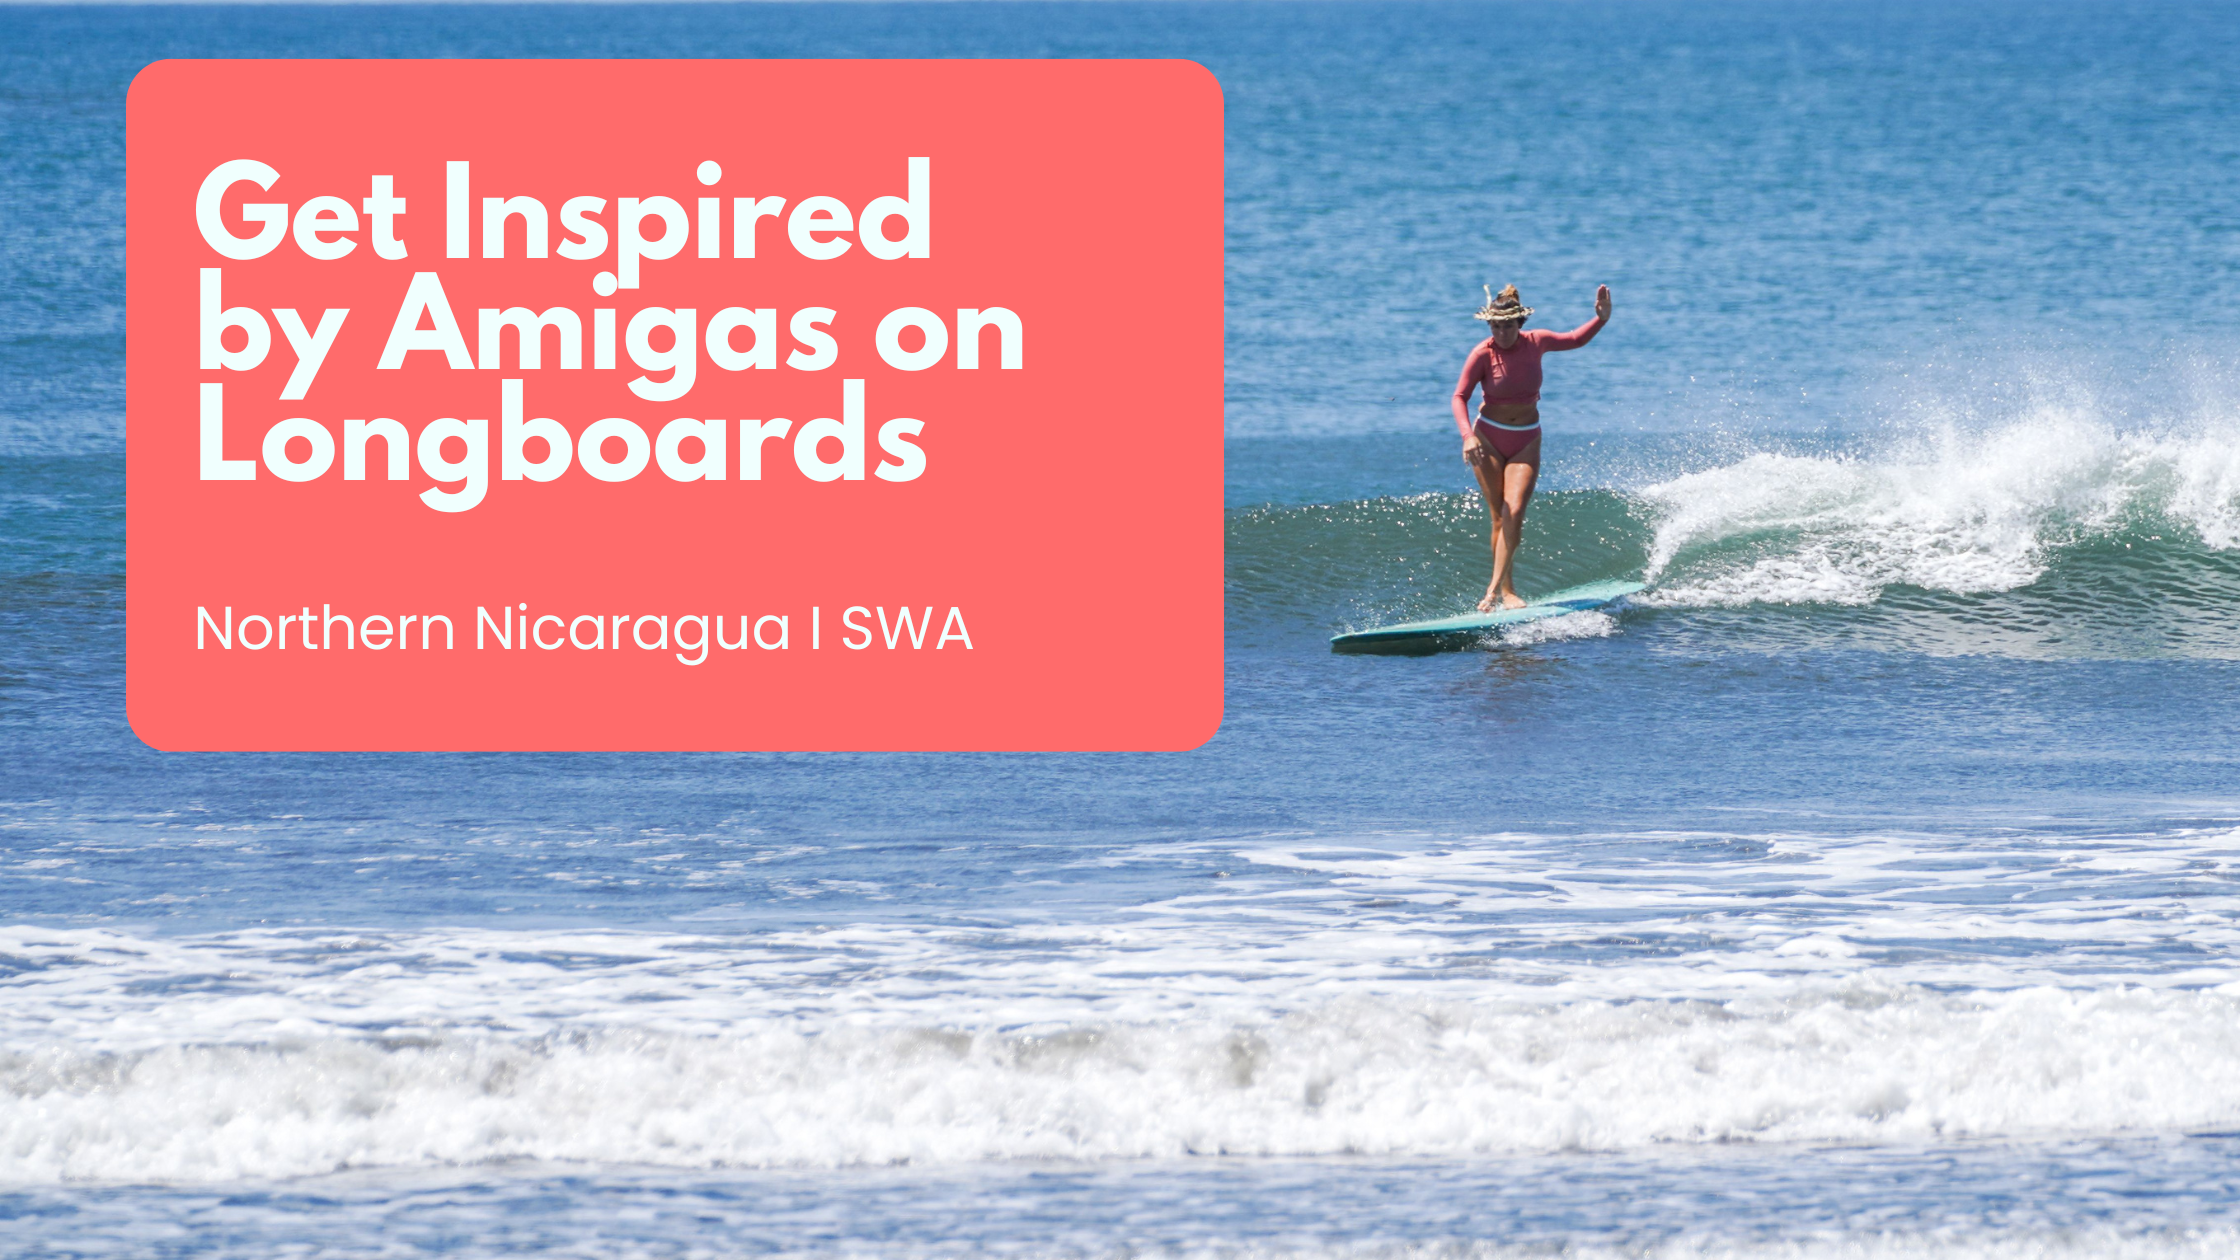 krak Blive ved Stue Watch This Video For Some Female Longboard Inspiration! - Surf With Amigas